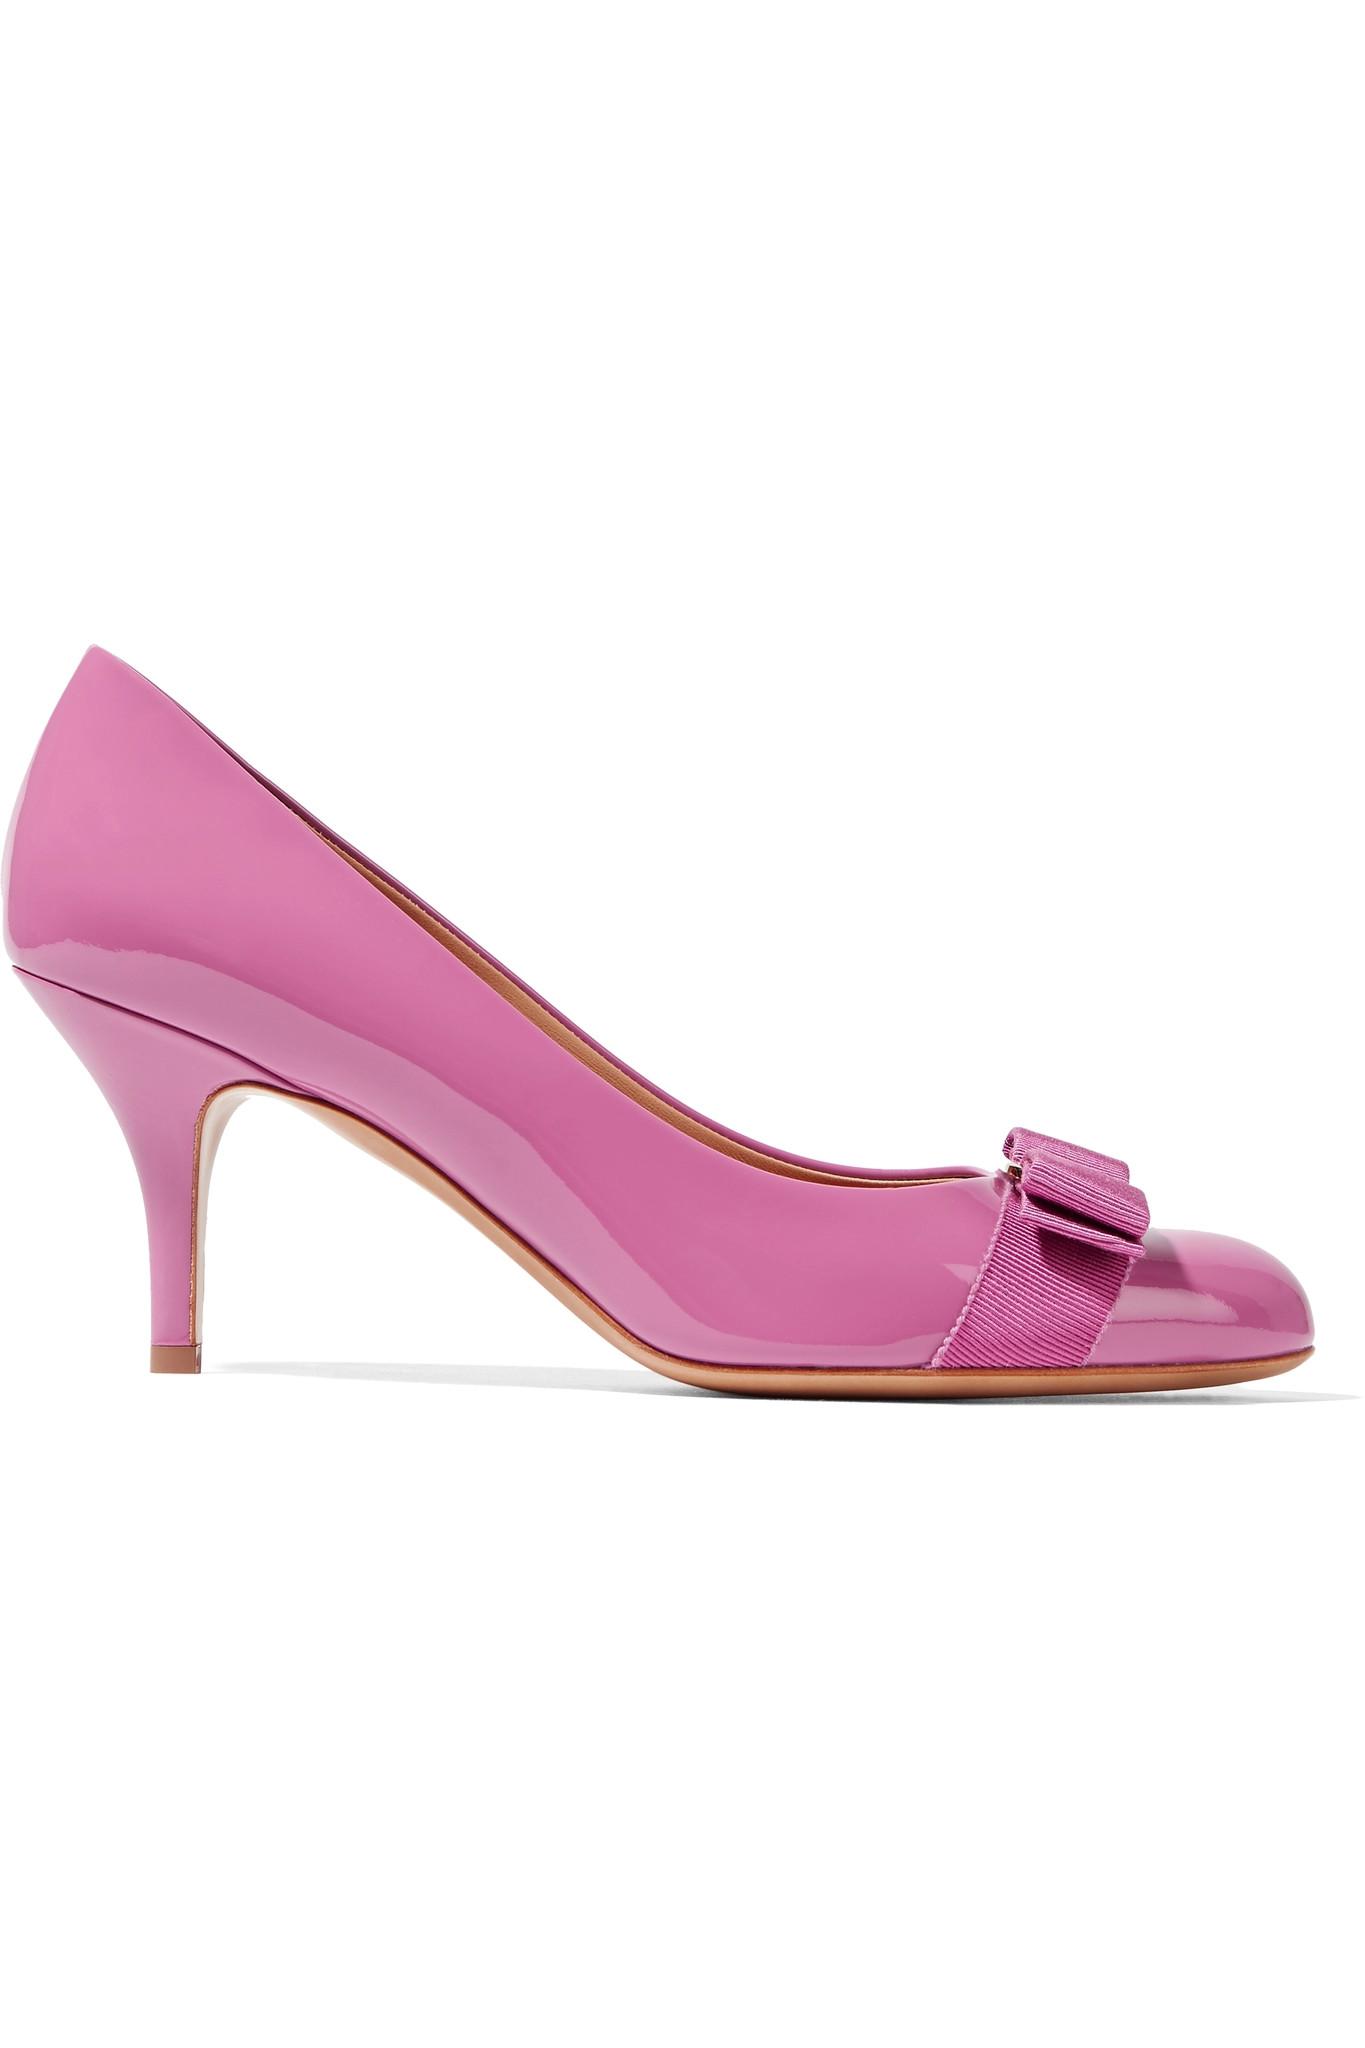 Ferragamo Carla 70 Embellished Patent-leather Pumps in Pink - Lyst